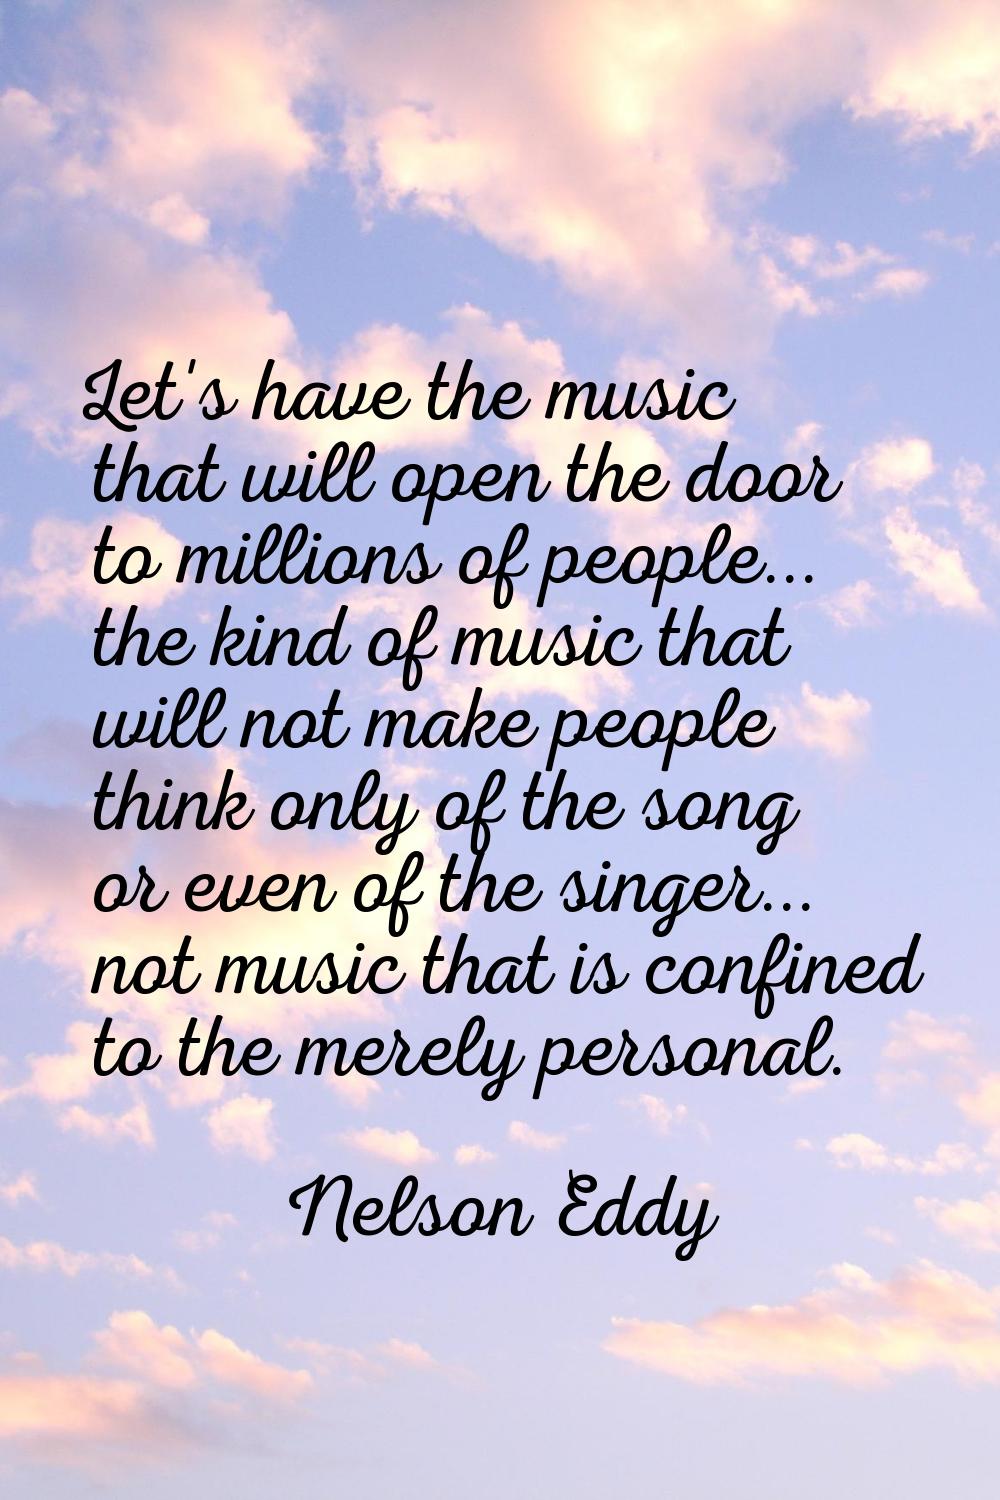 Let's have the music that will open the door to millions of people... the kind of music that will n